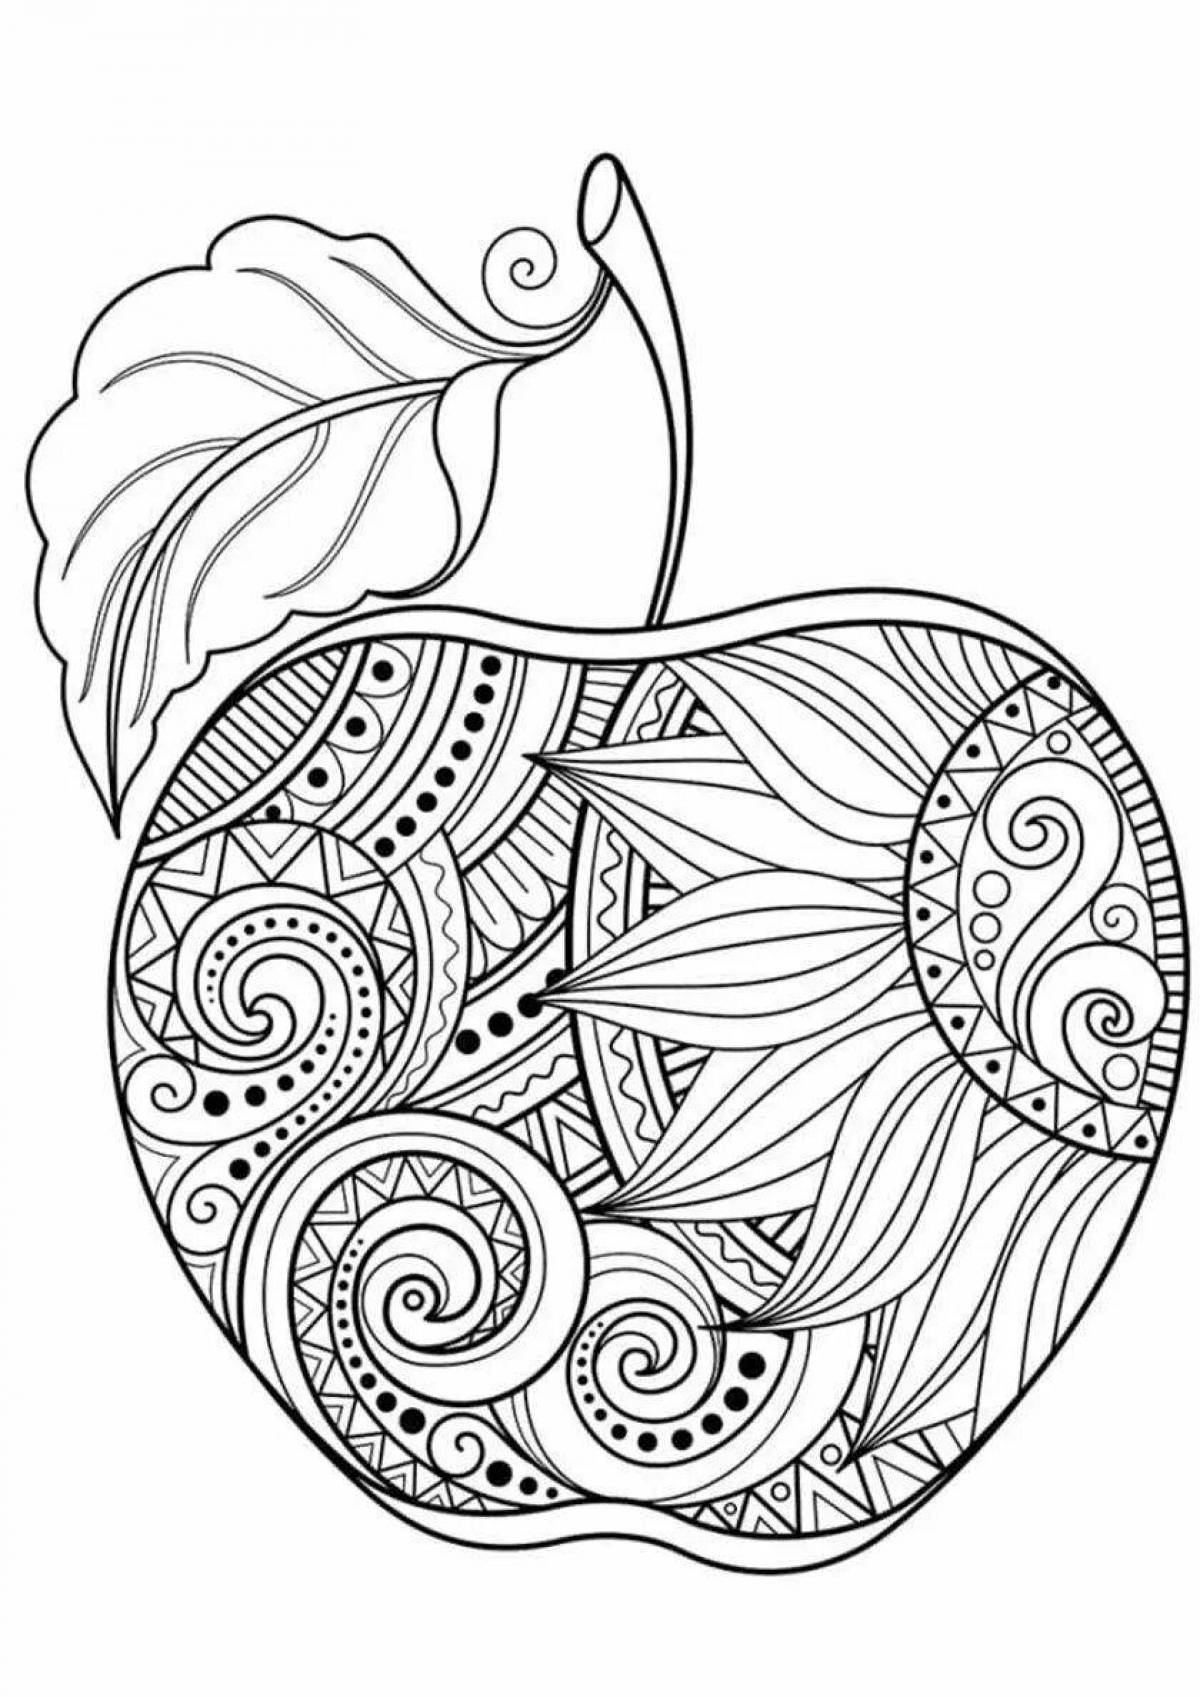 Color-imagination coloring page graphic